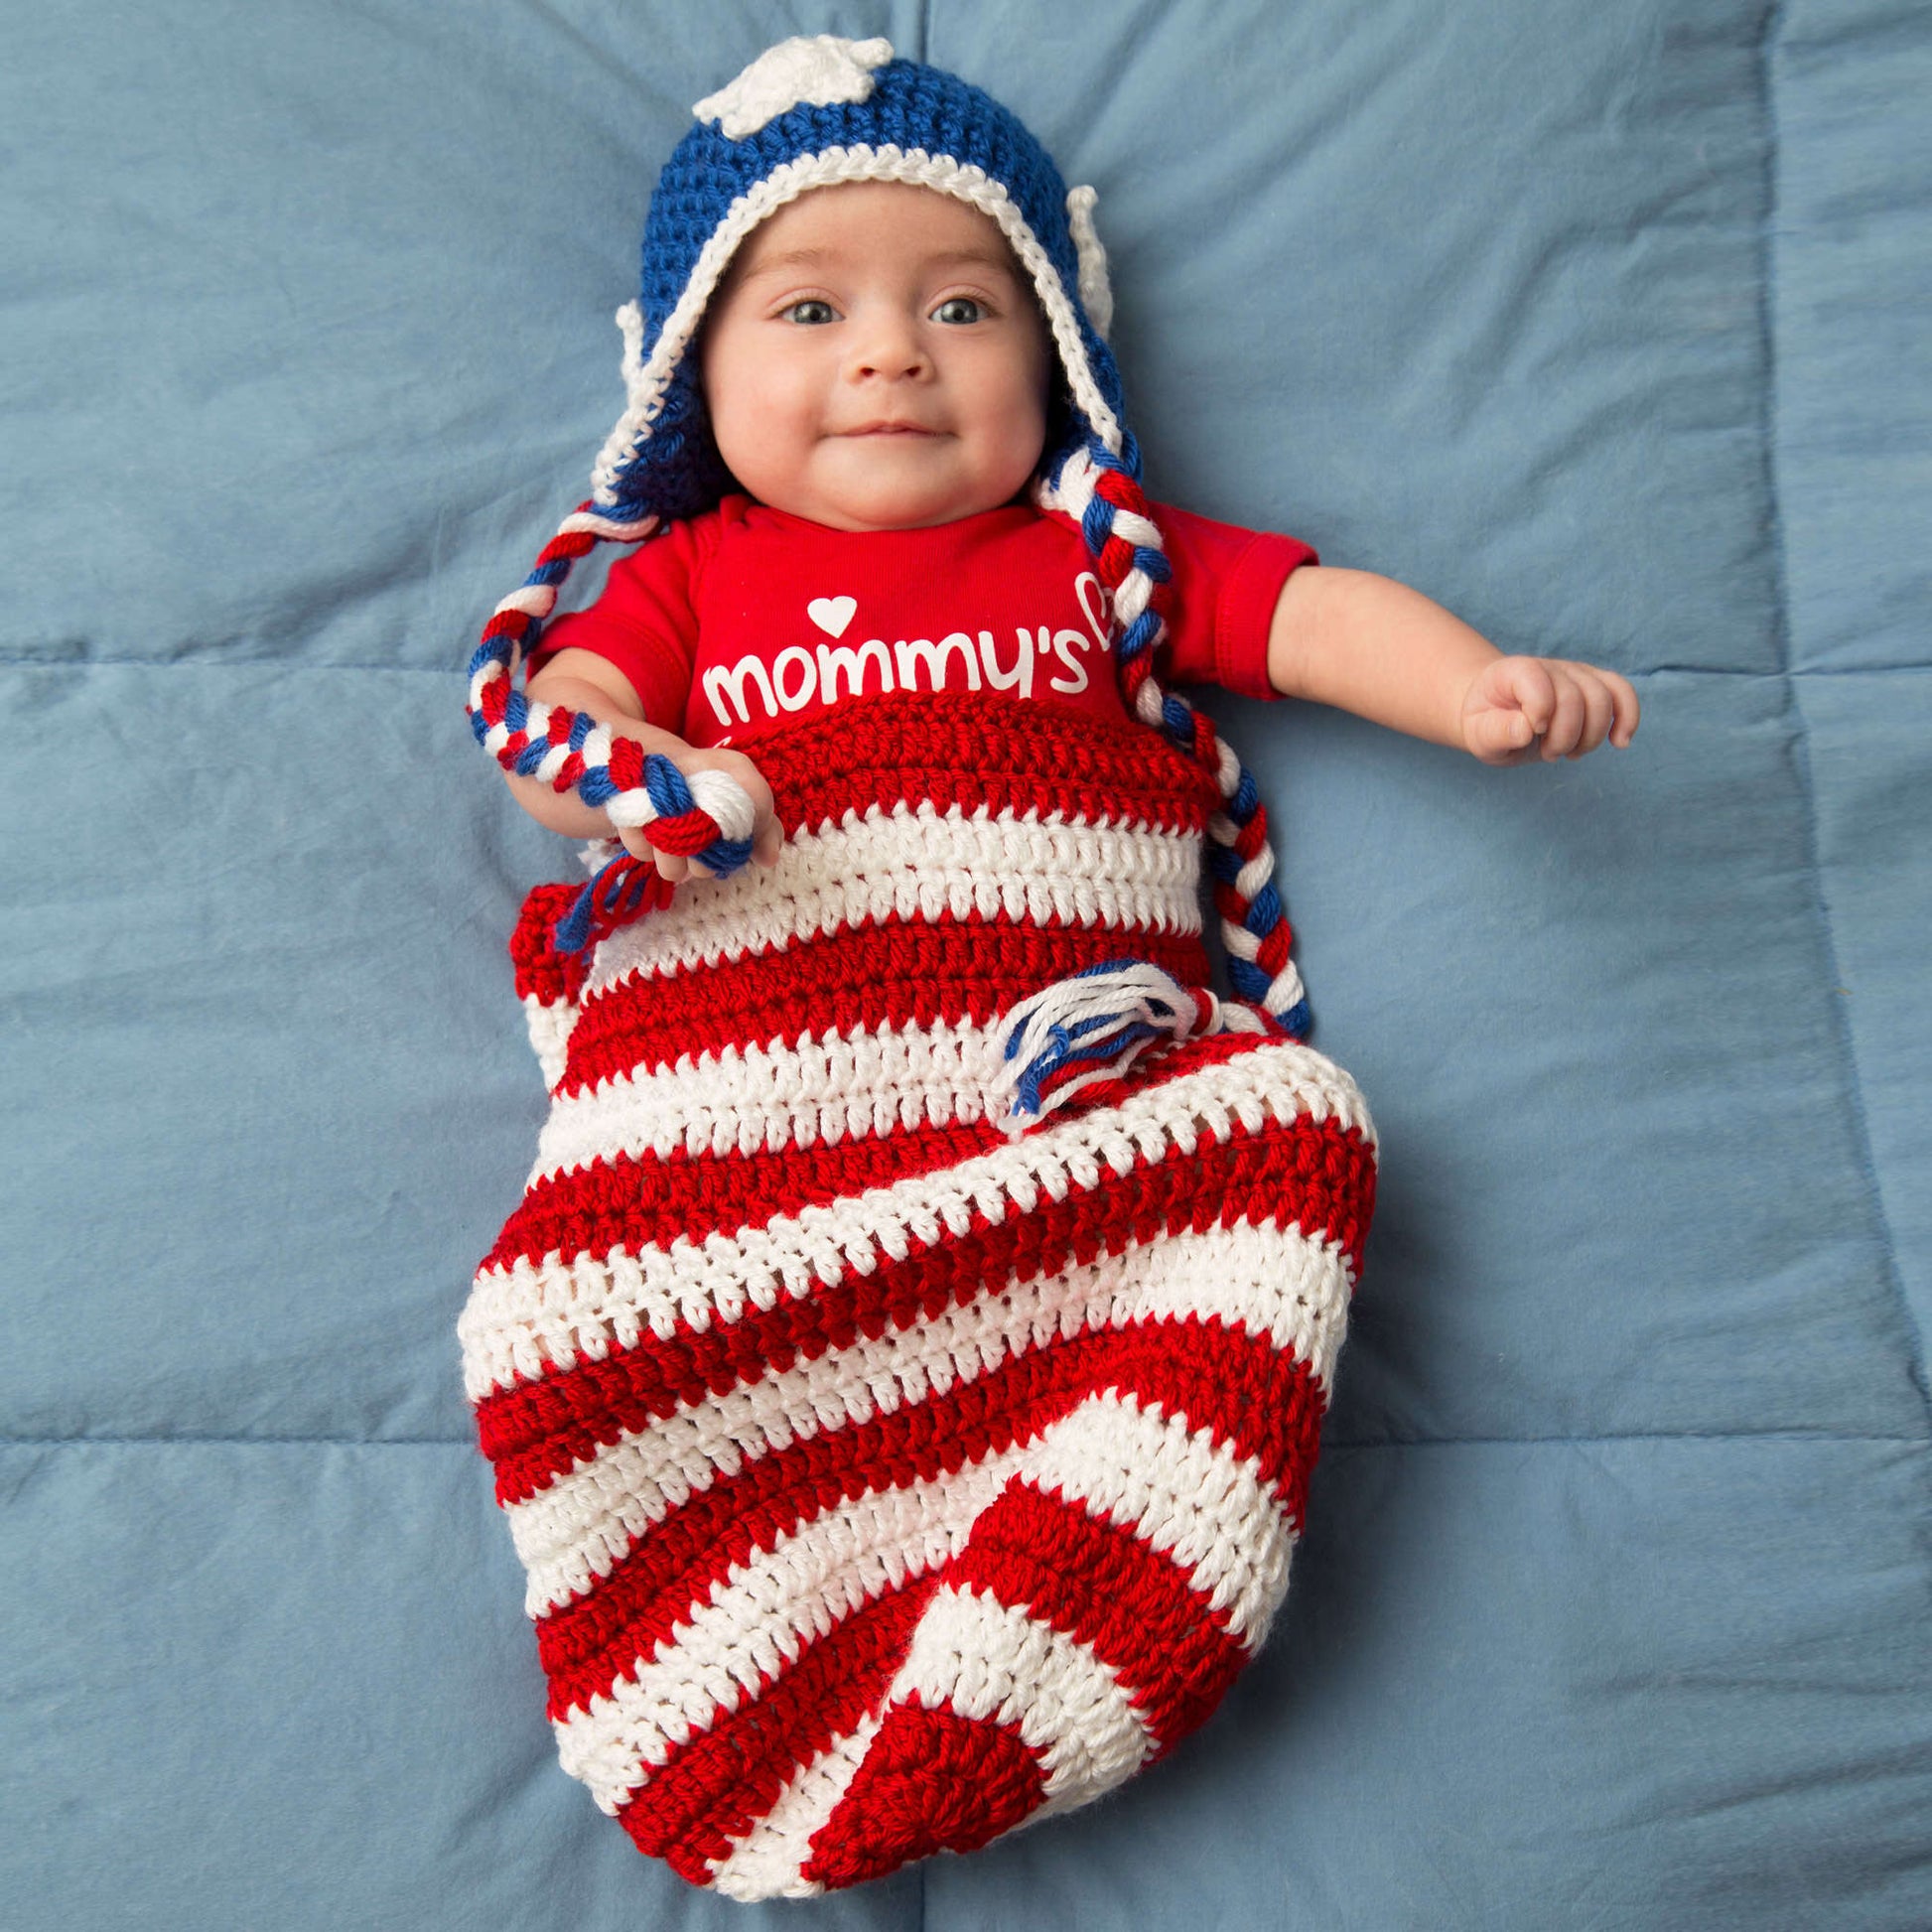 Free Red Crochet Heart Patriotic Baby Cocoon & Hat Pattern